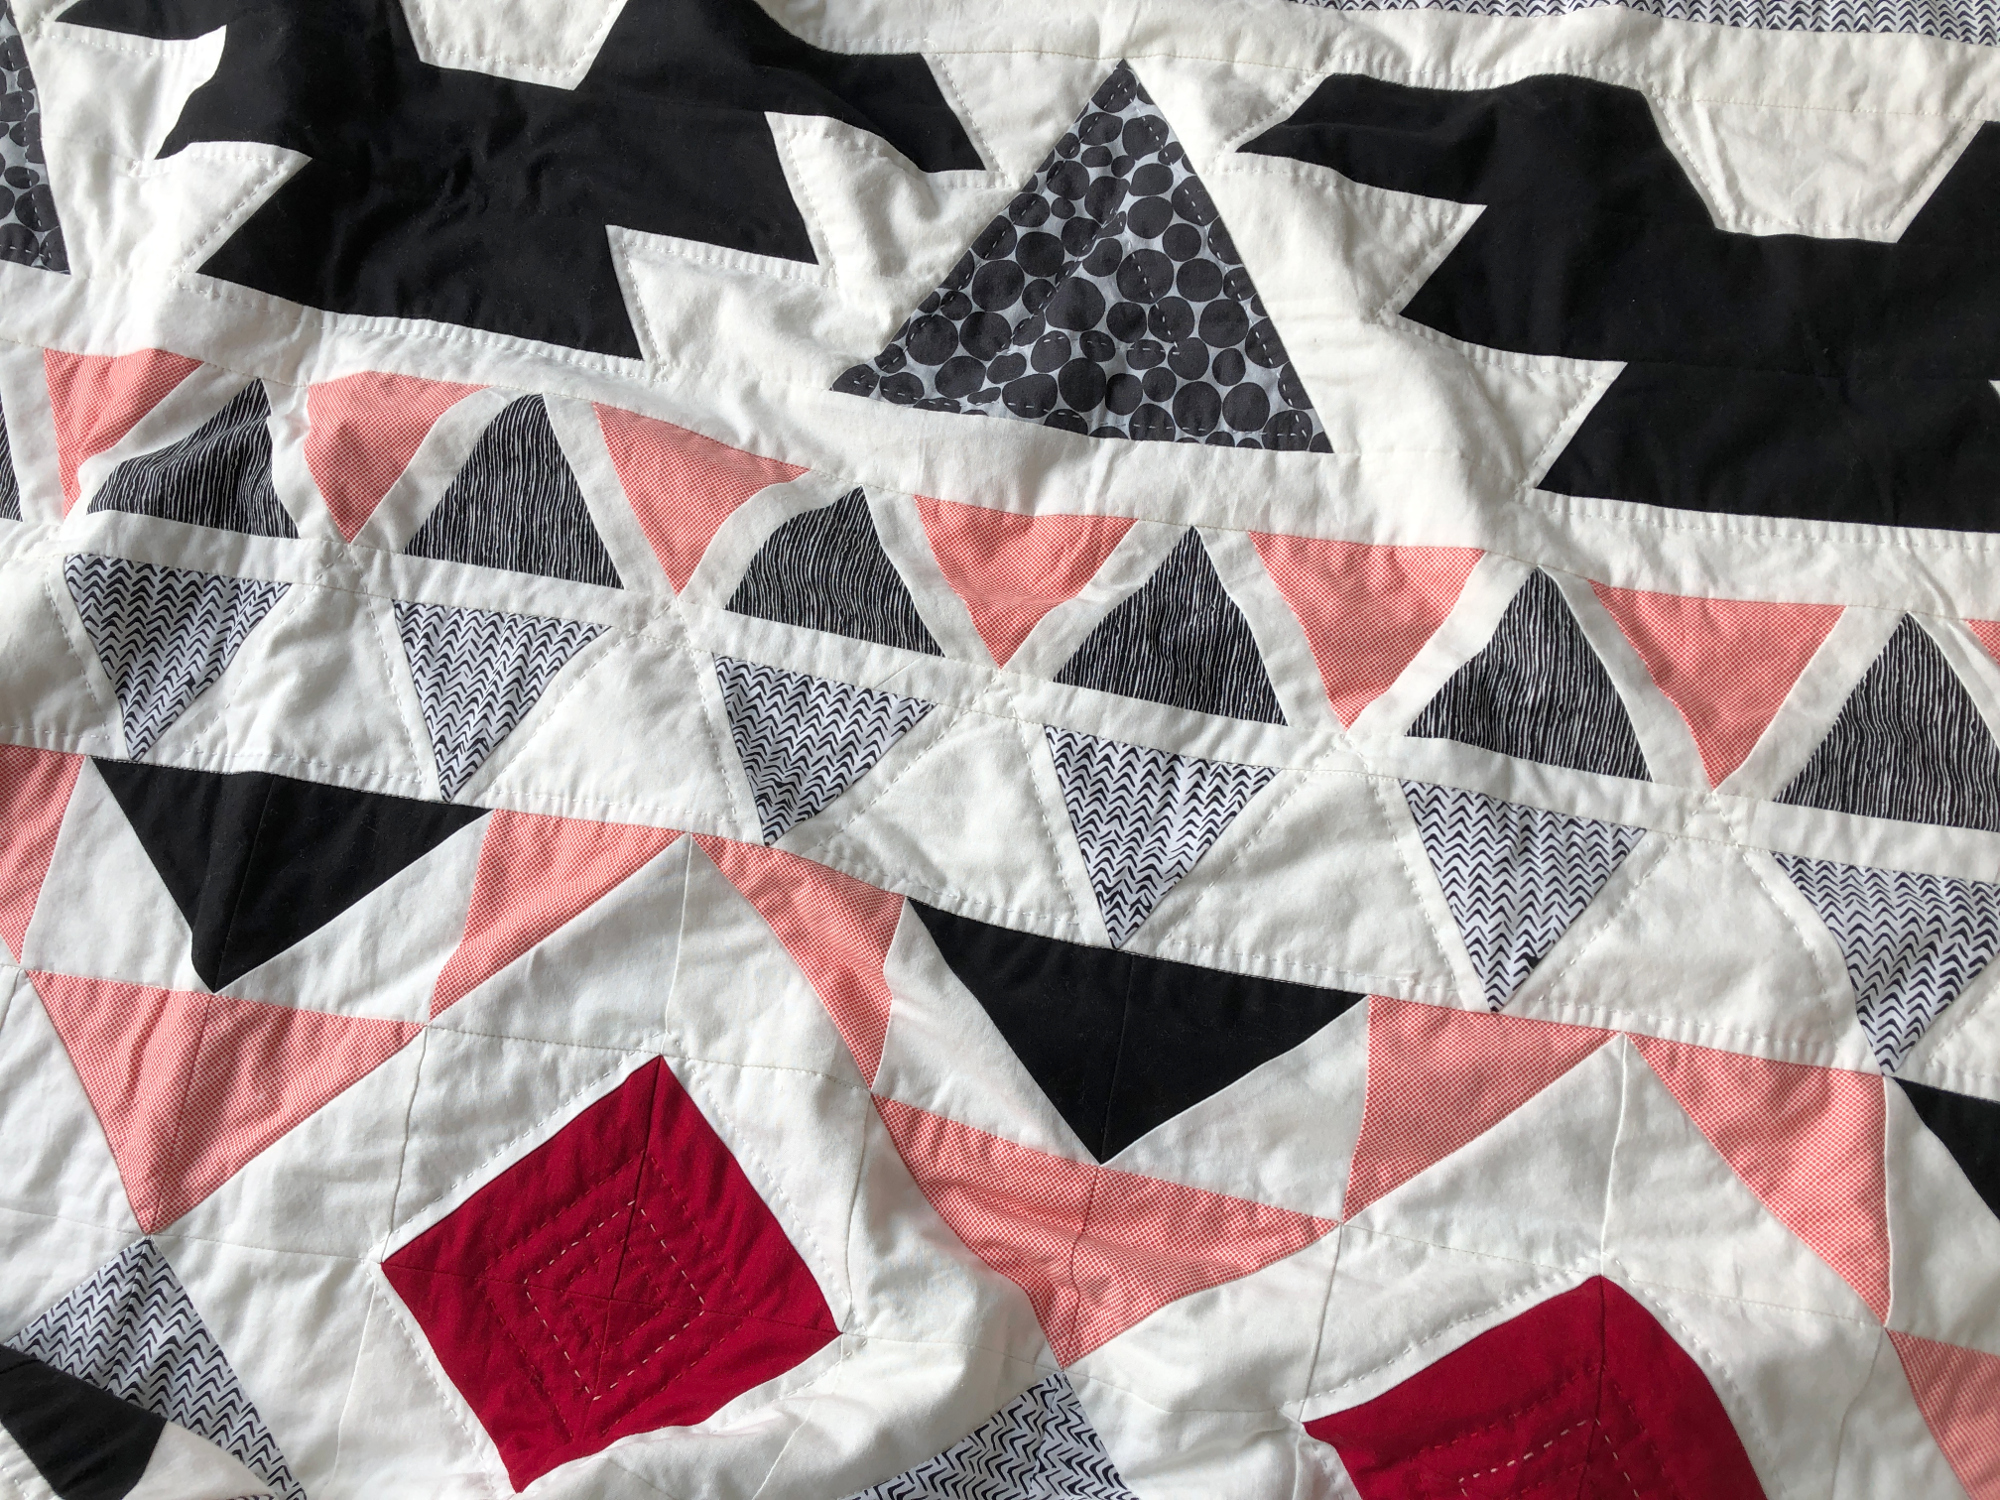 A warrior quilt for Kasia